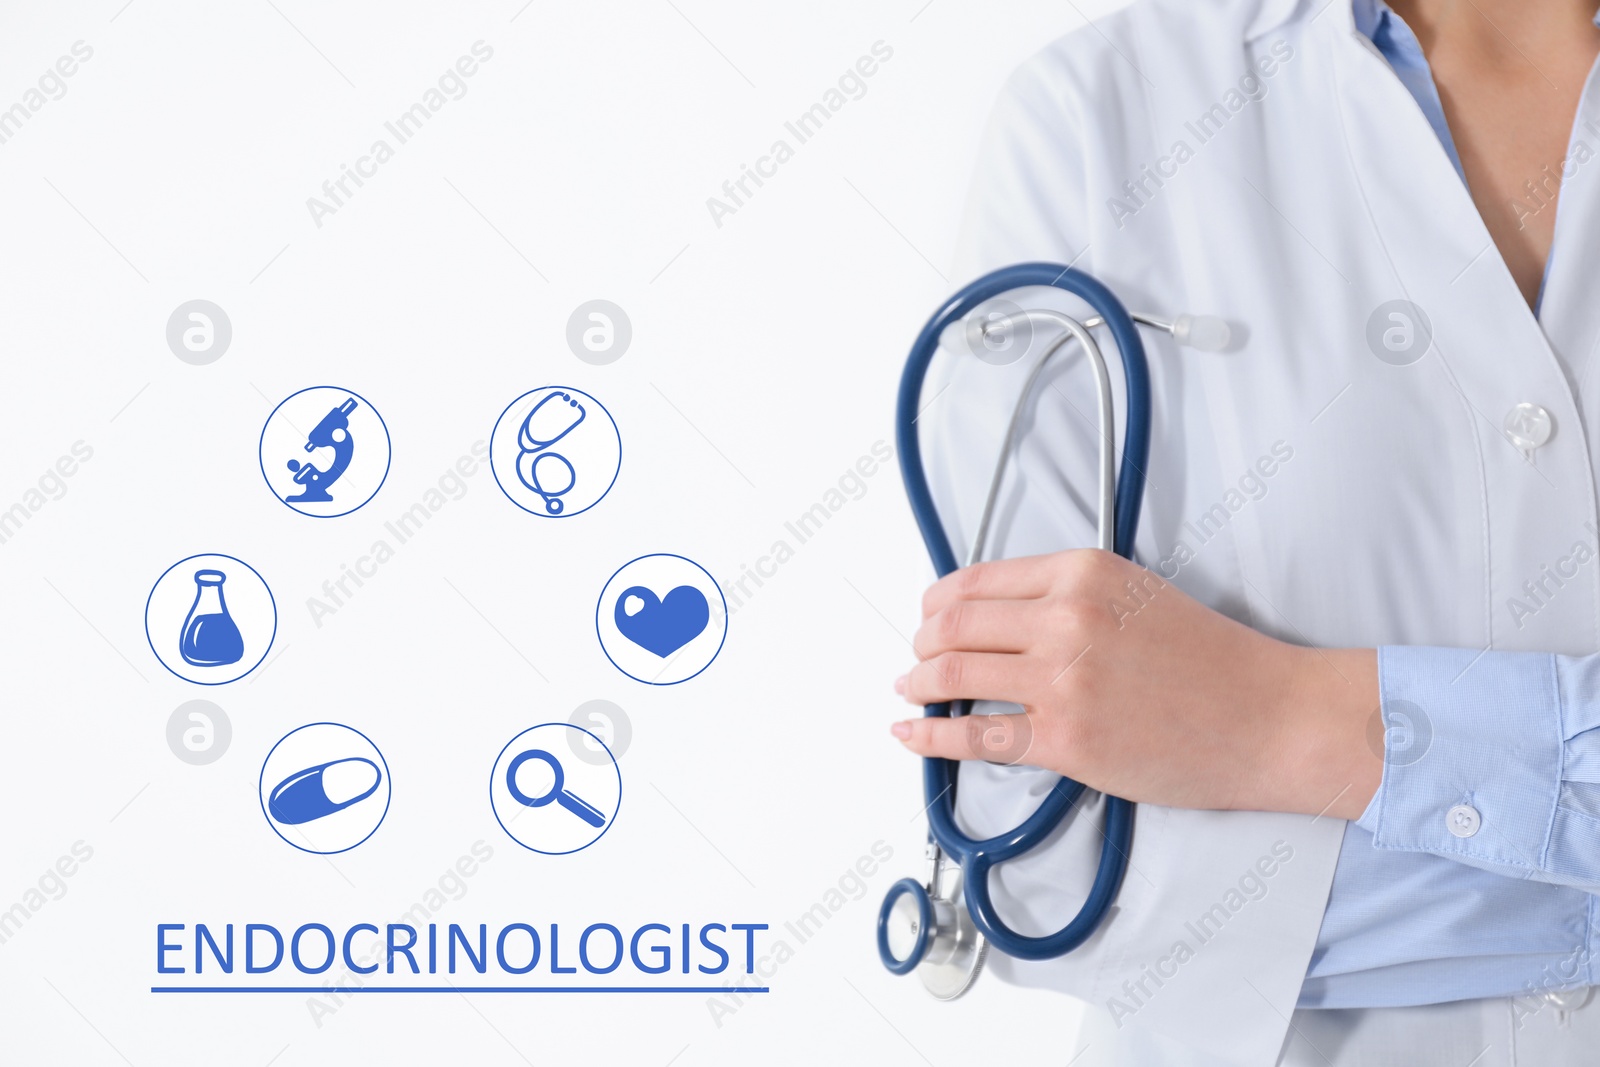 Image of Endocrinologist with stethoscope and different icons on white background, closeup